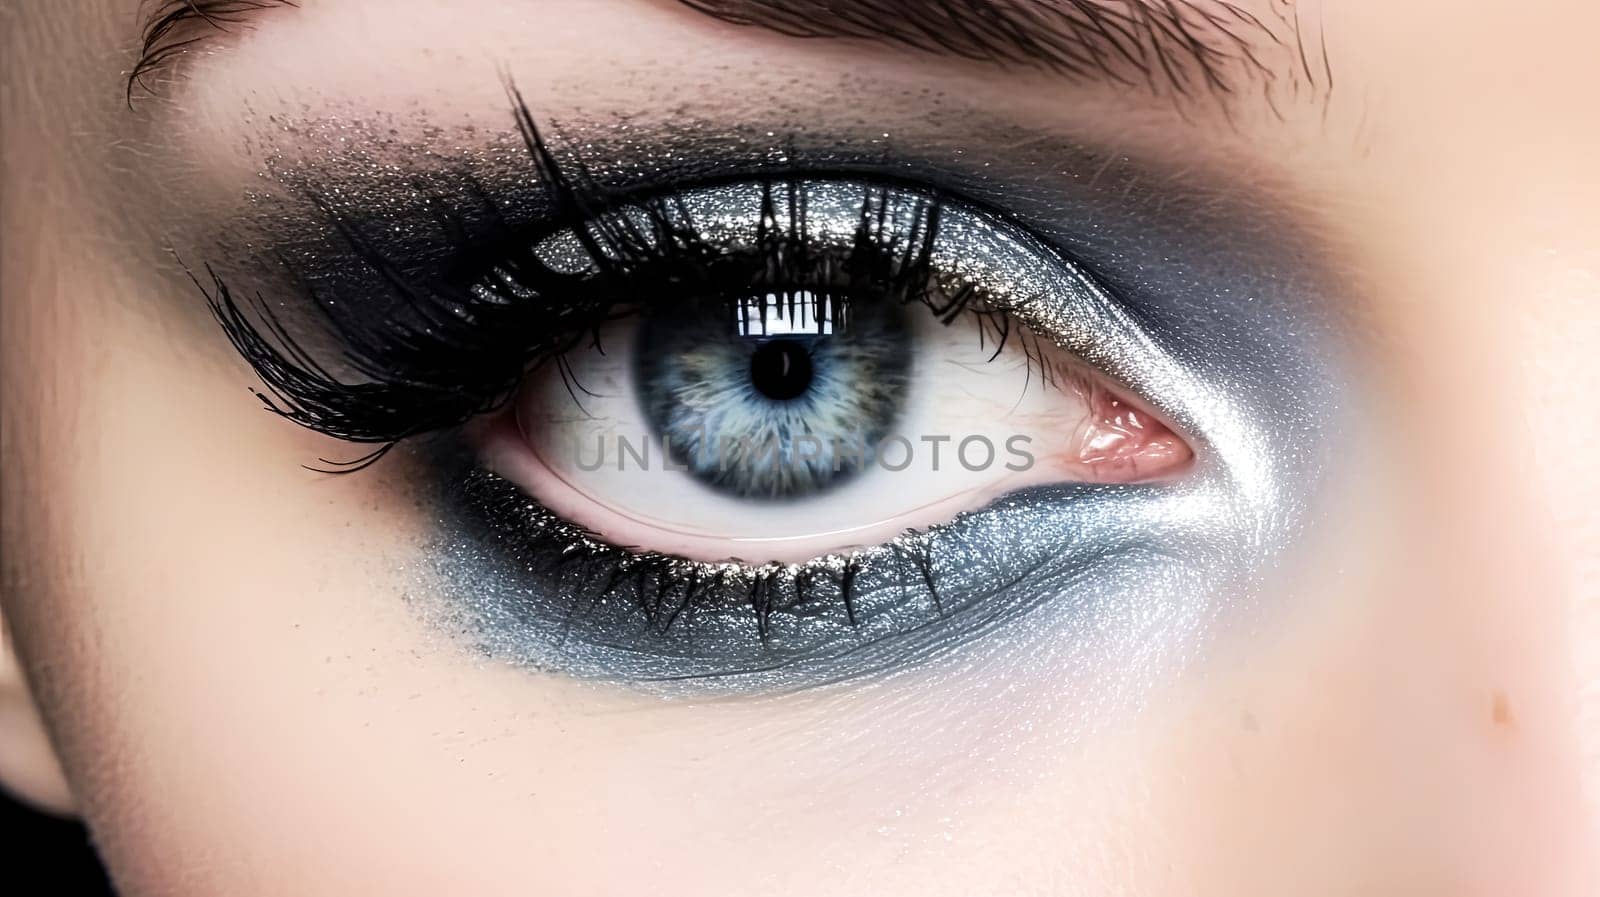 A woman with red and black eye makeup. The eye makeup is bold and dramatic, with the red and black colors contrasting against her blue eyes. Scene is edgy and confident